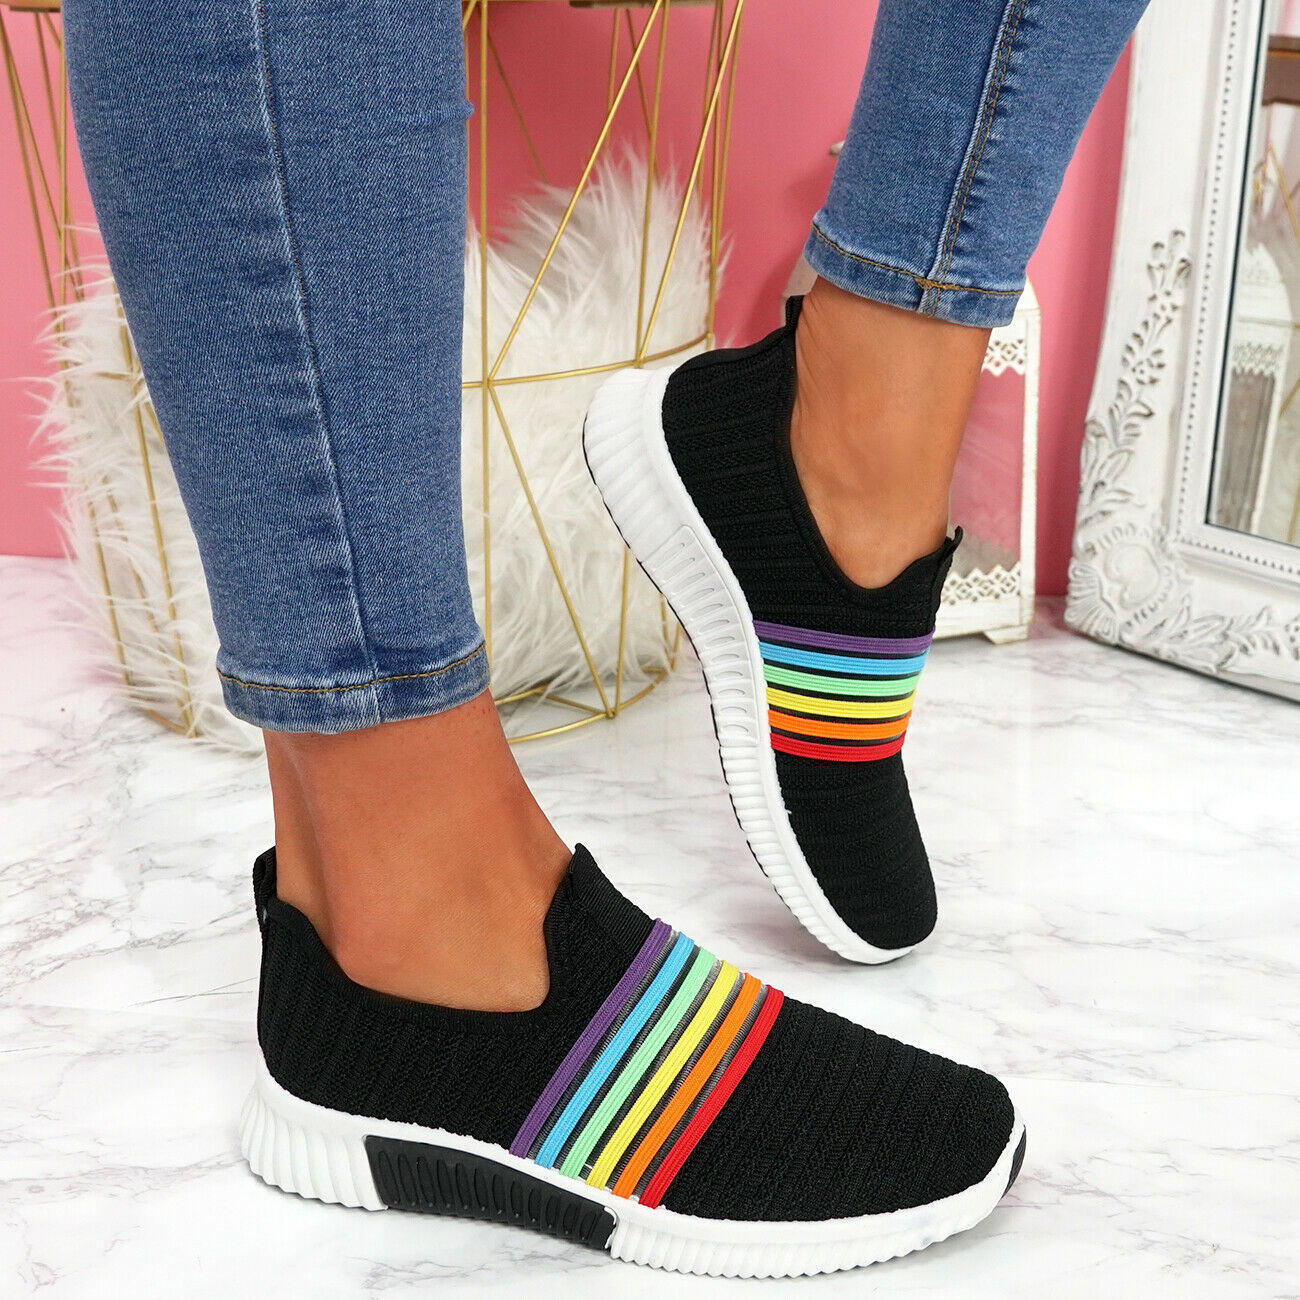 Flying netted rainbow sneakers